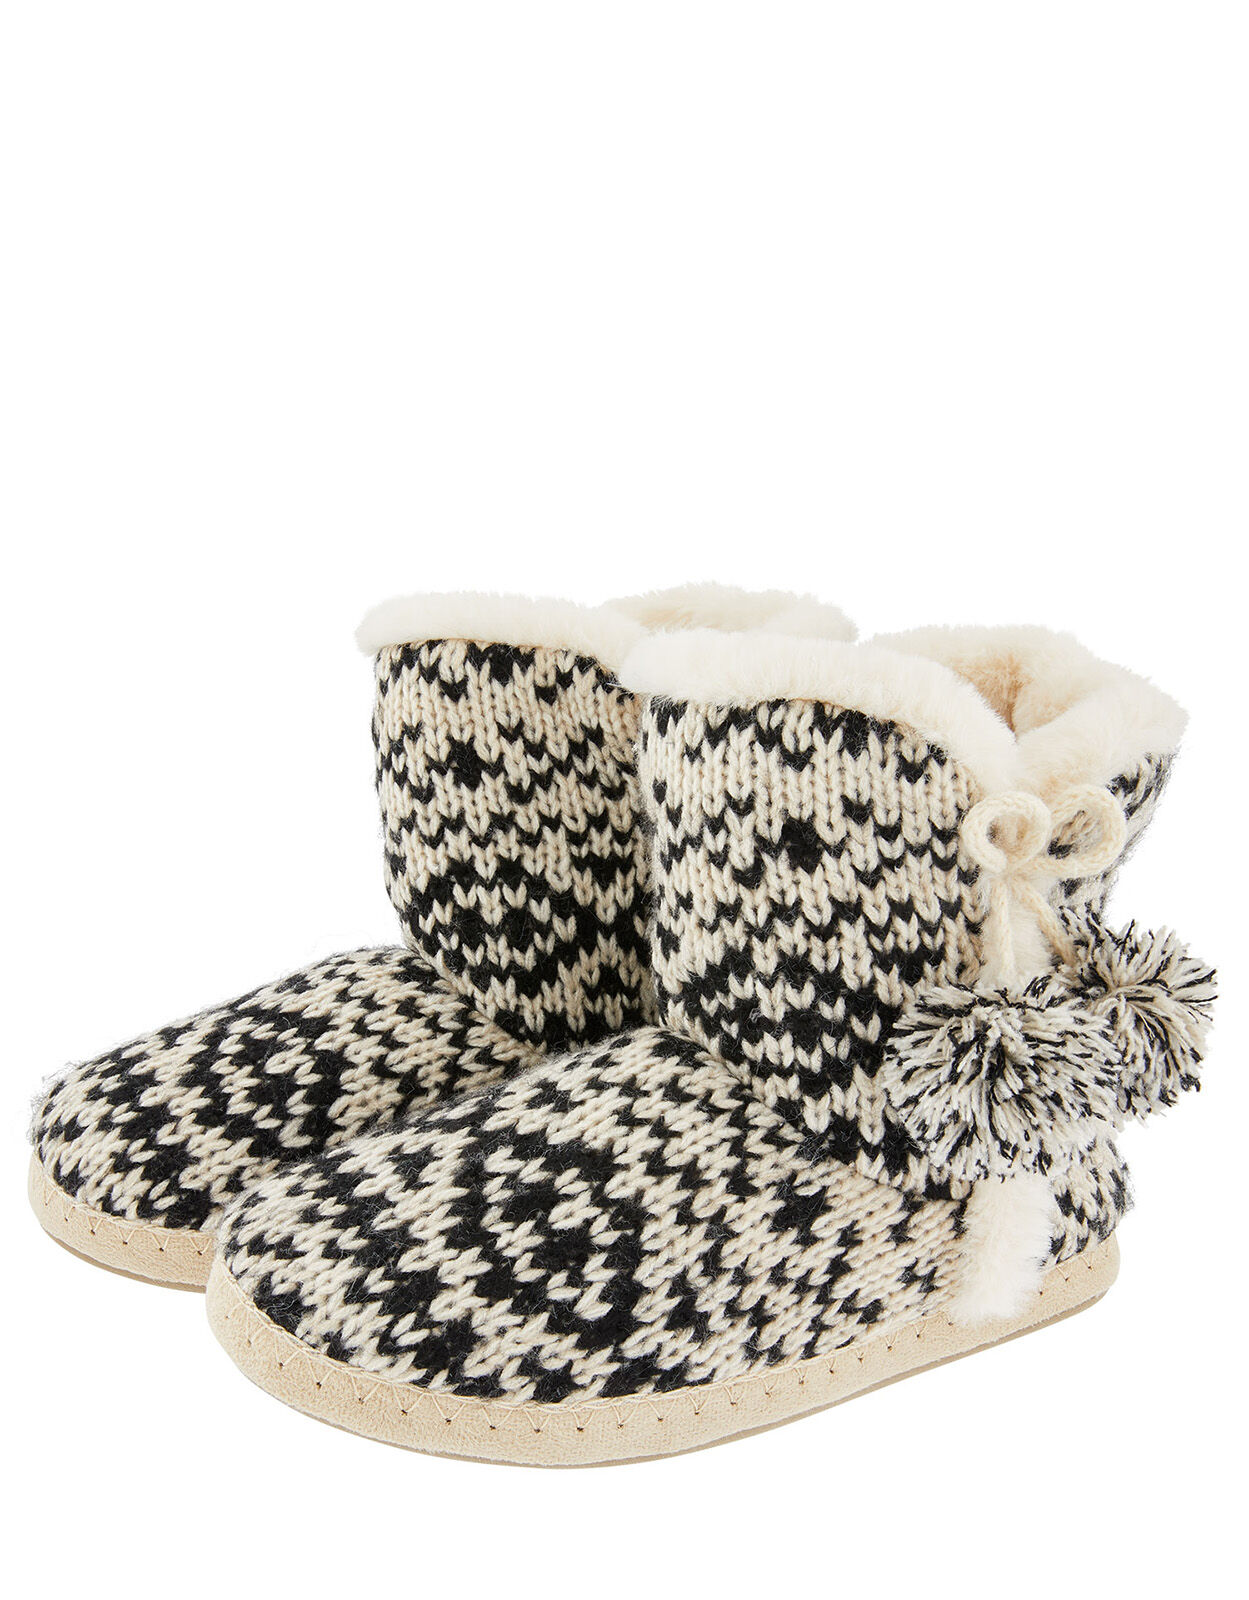 accessorize boot slippers